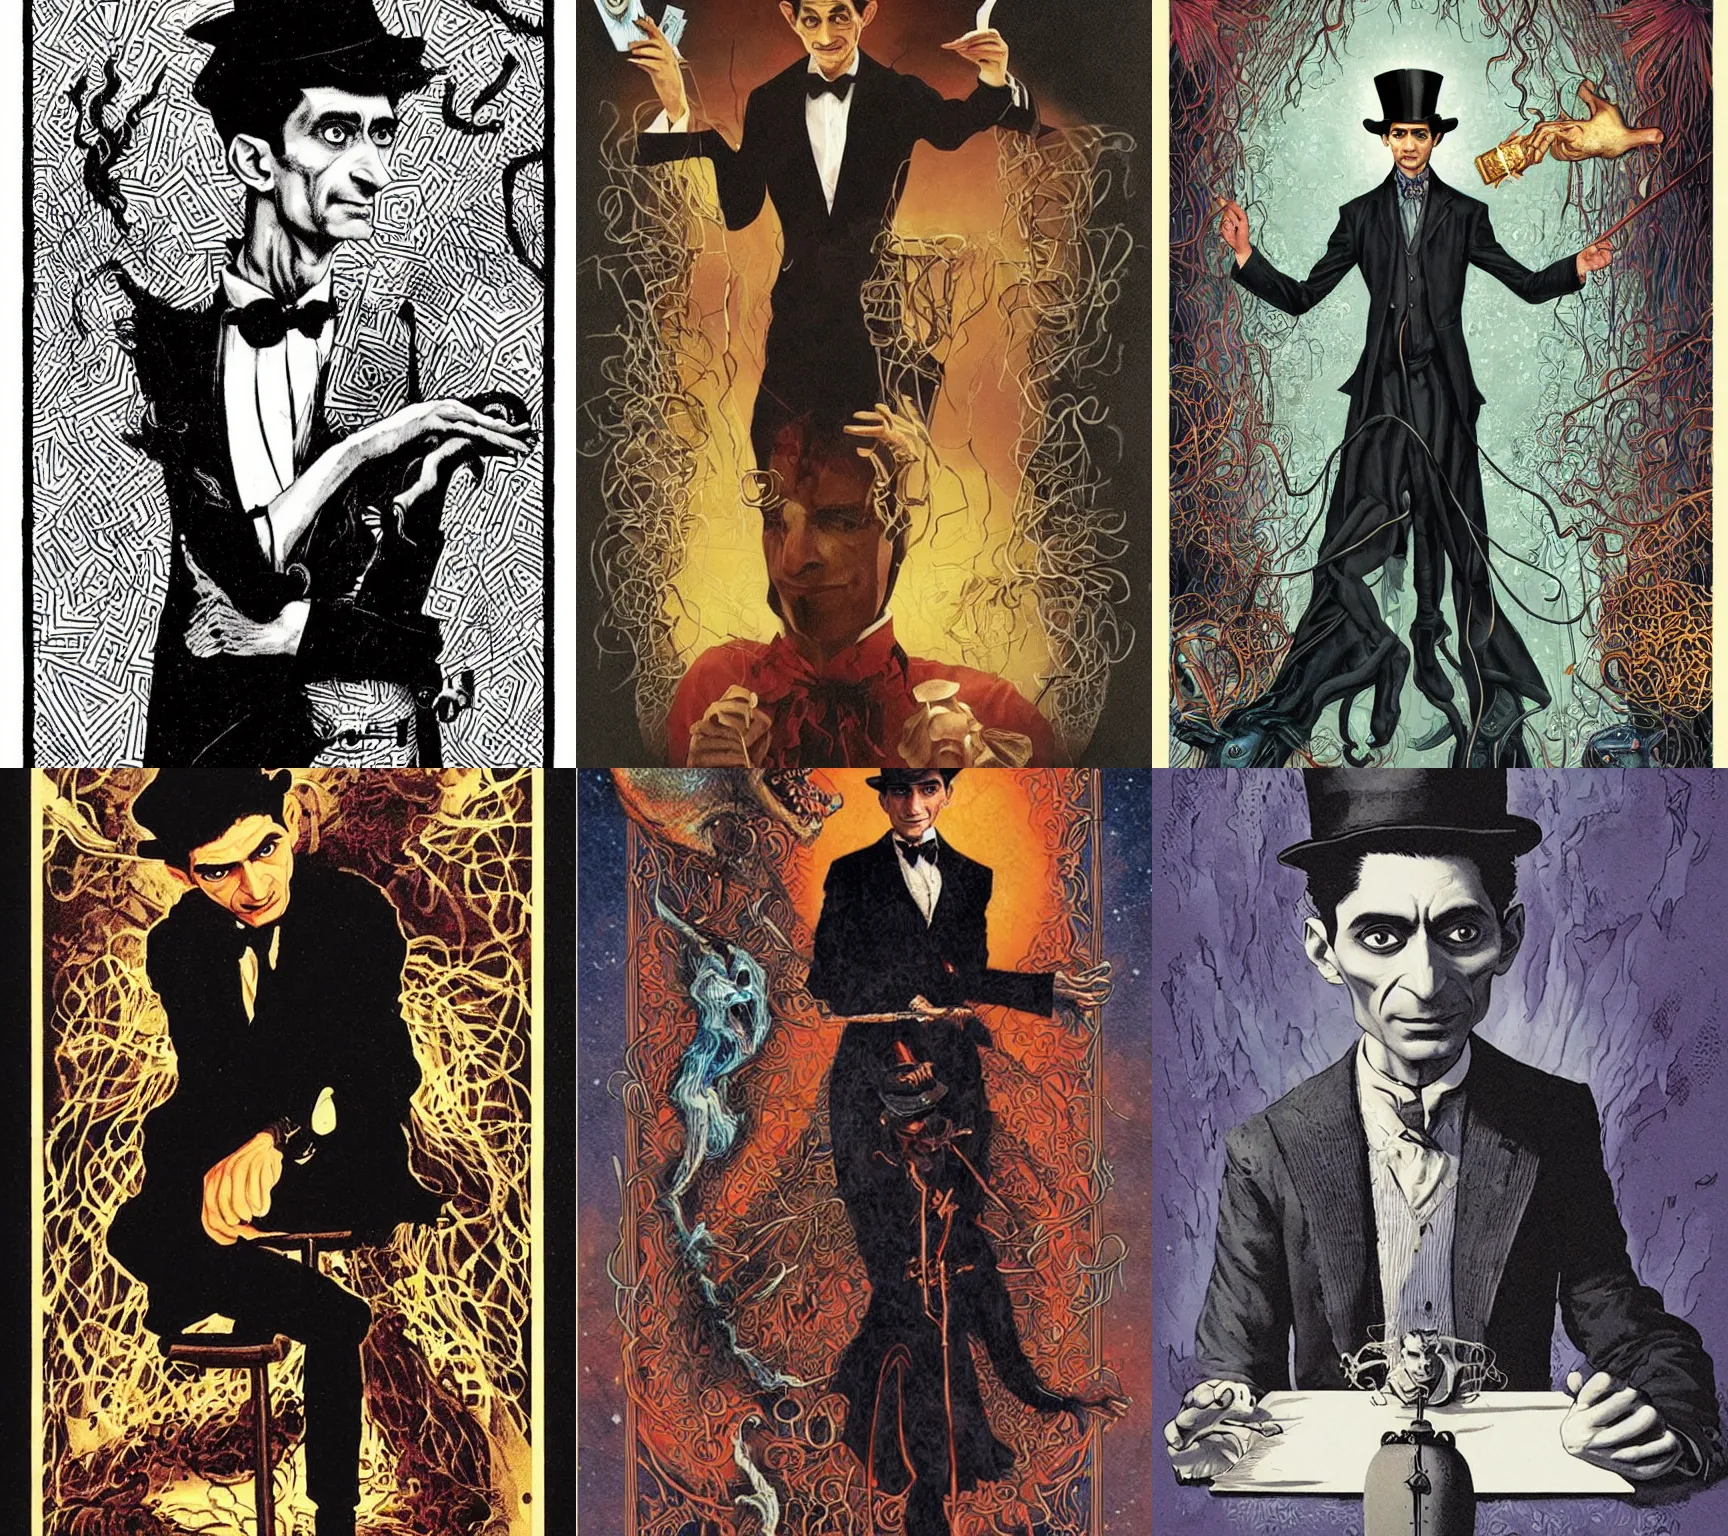 Prompt: A striking illustration of Franz Kafka as the Magician charcter in the Tarot deck designed by Jason Edmiston and Joe Fenton